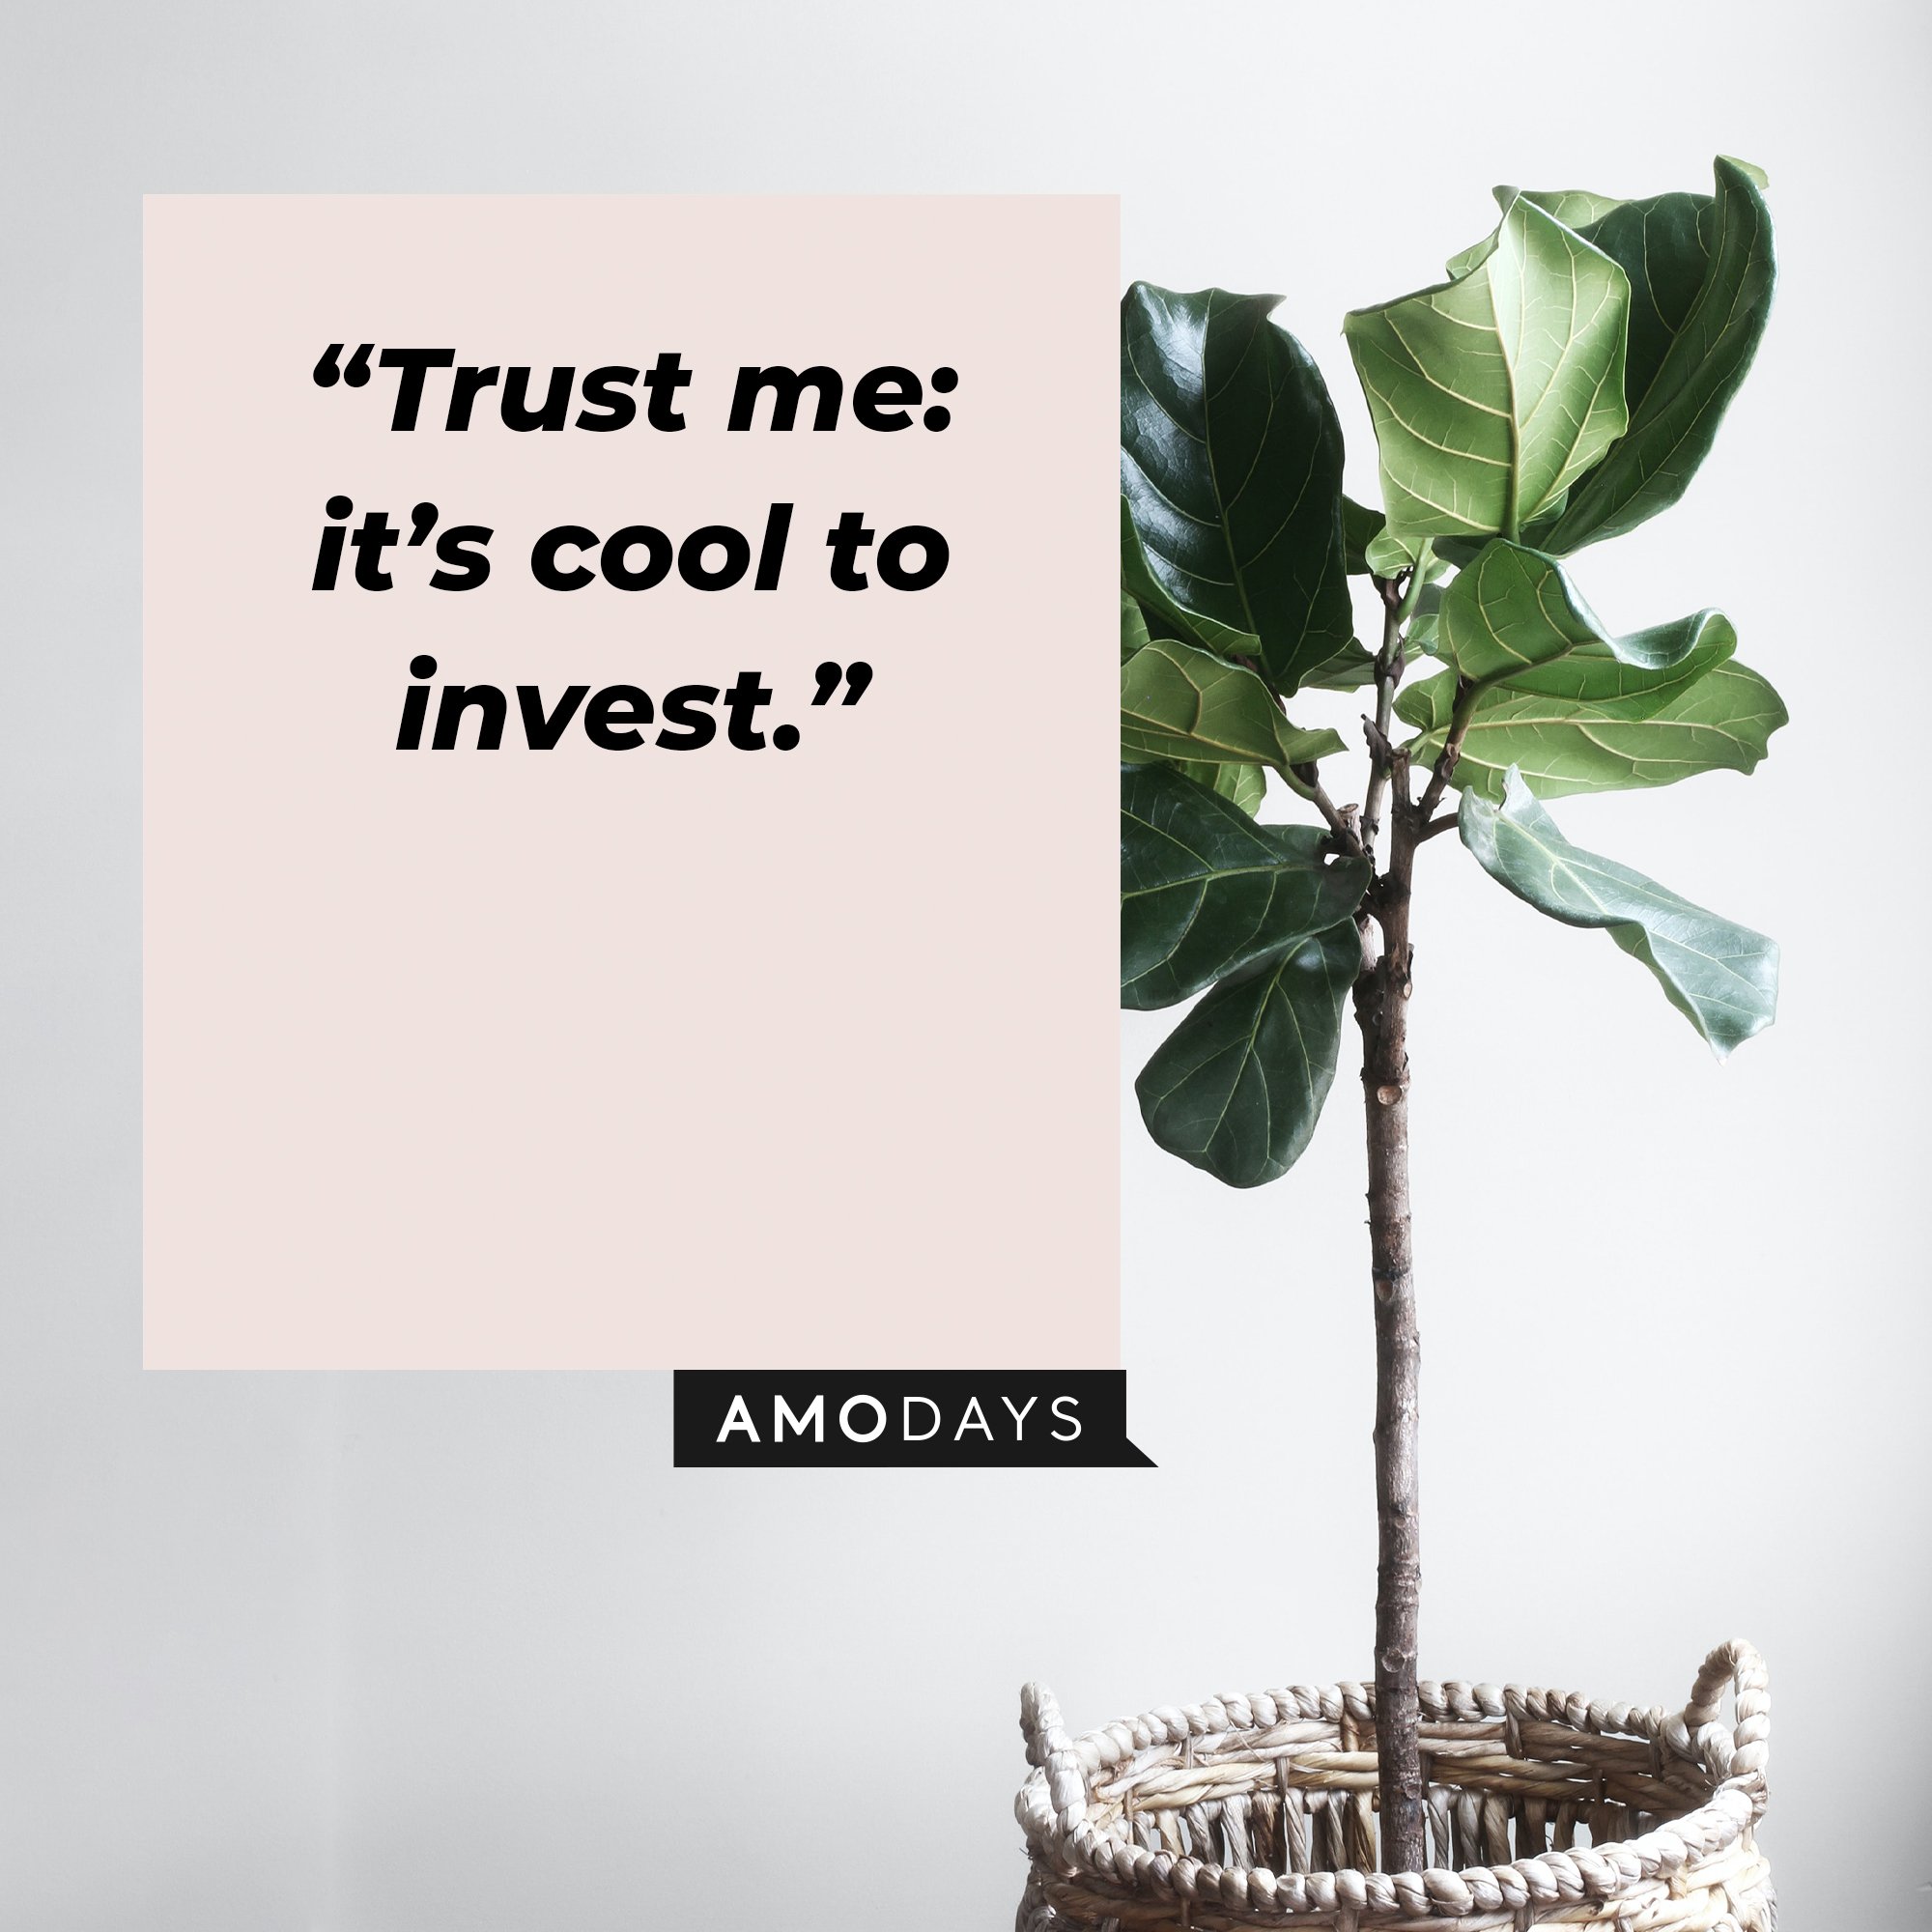 Juice WRLD’s quote: “Trust me: it’s cool to invest.” | Image: AmoDays